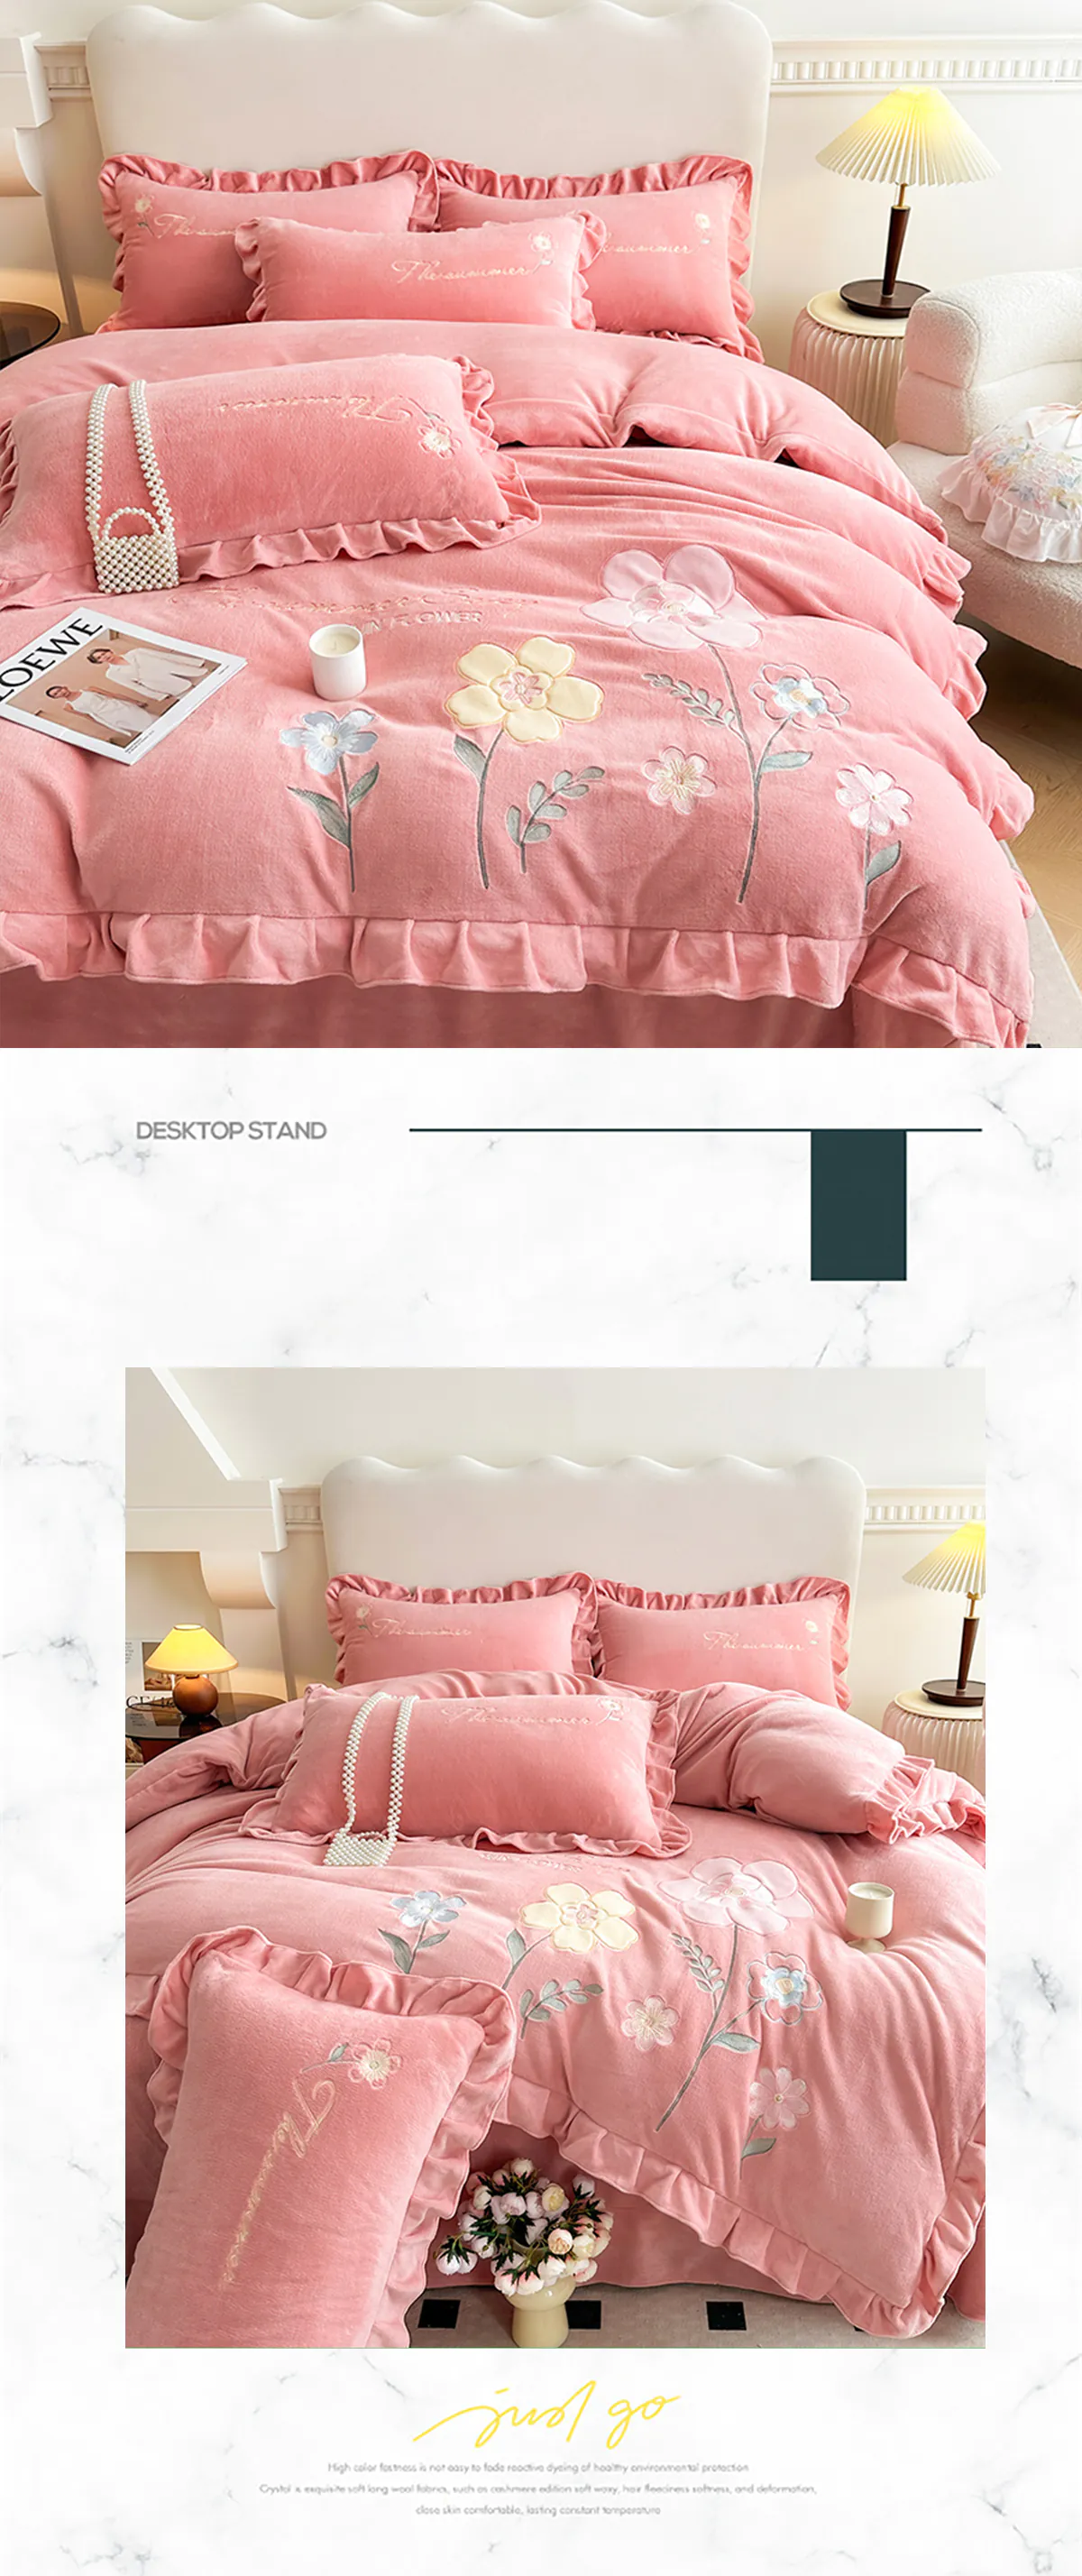 Comfy-Milk-Fiber-Embroidery-Quilt-Cover-Bed-Sheet-Pillowcases-Set14